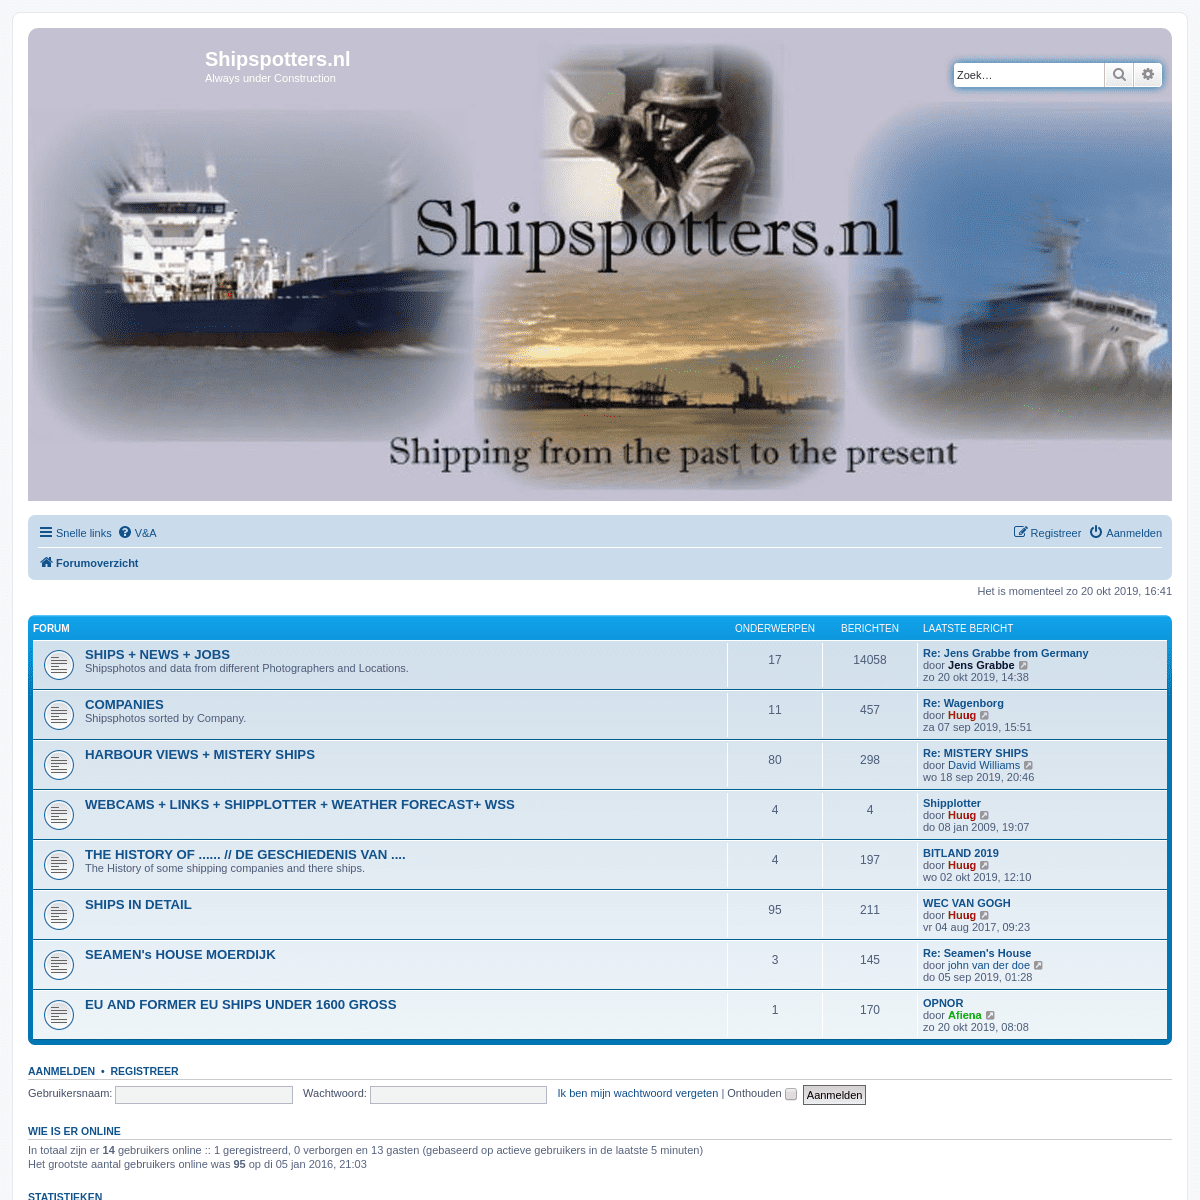 A complete backup of shipspotters.nl